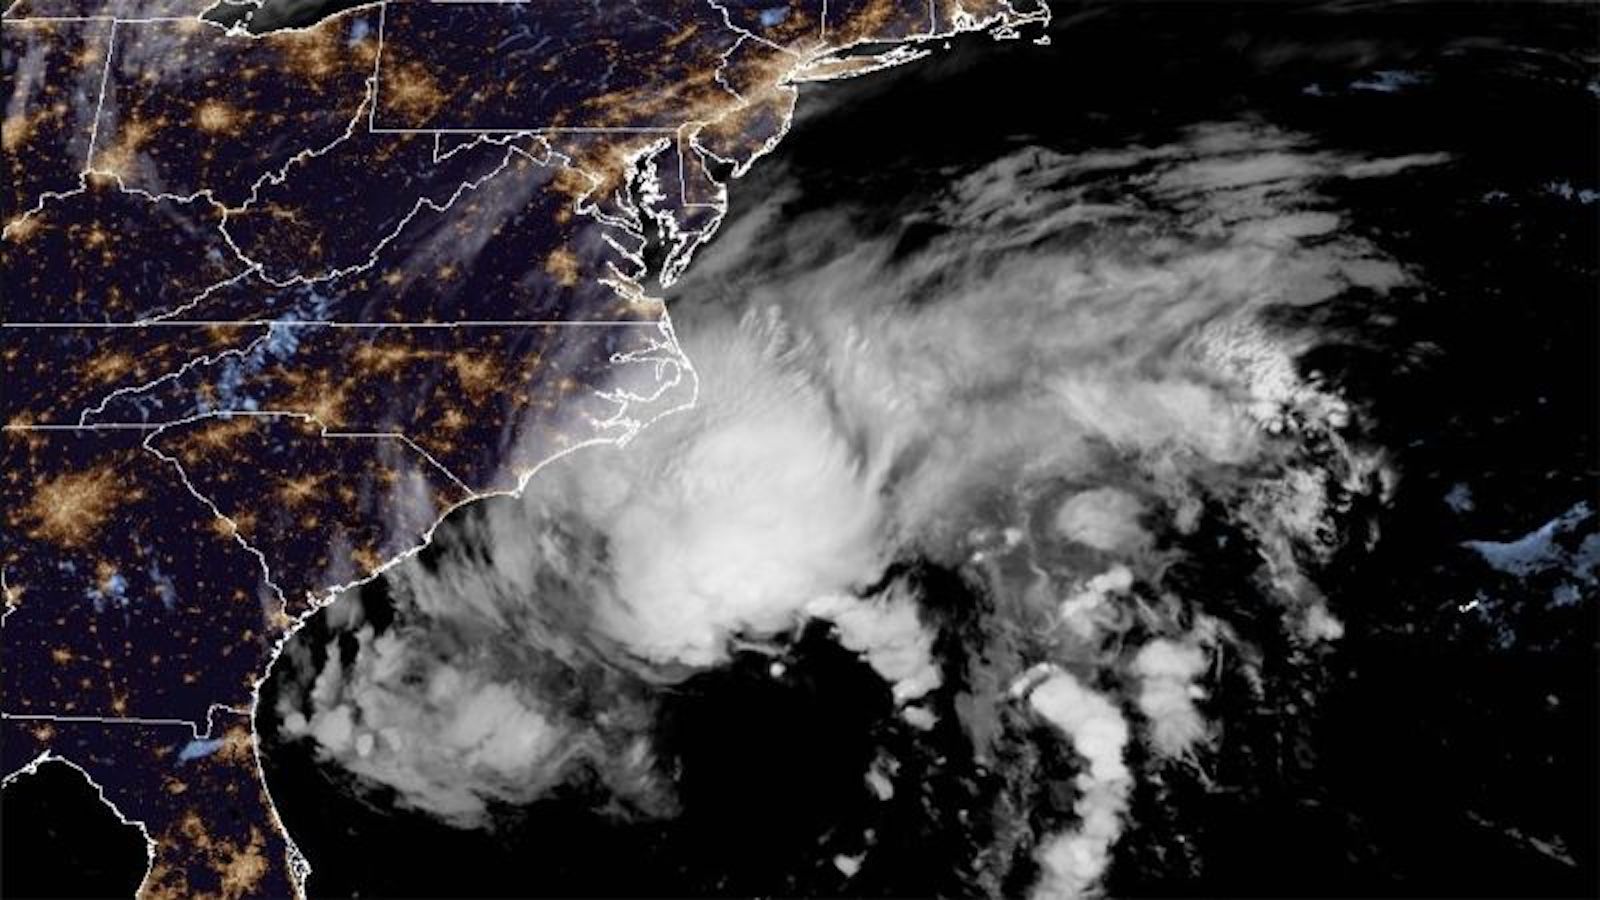 The East Coast of the United States is under a tropical storm warning that could bring rain and strong winds